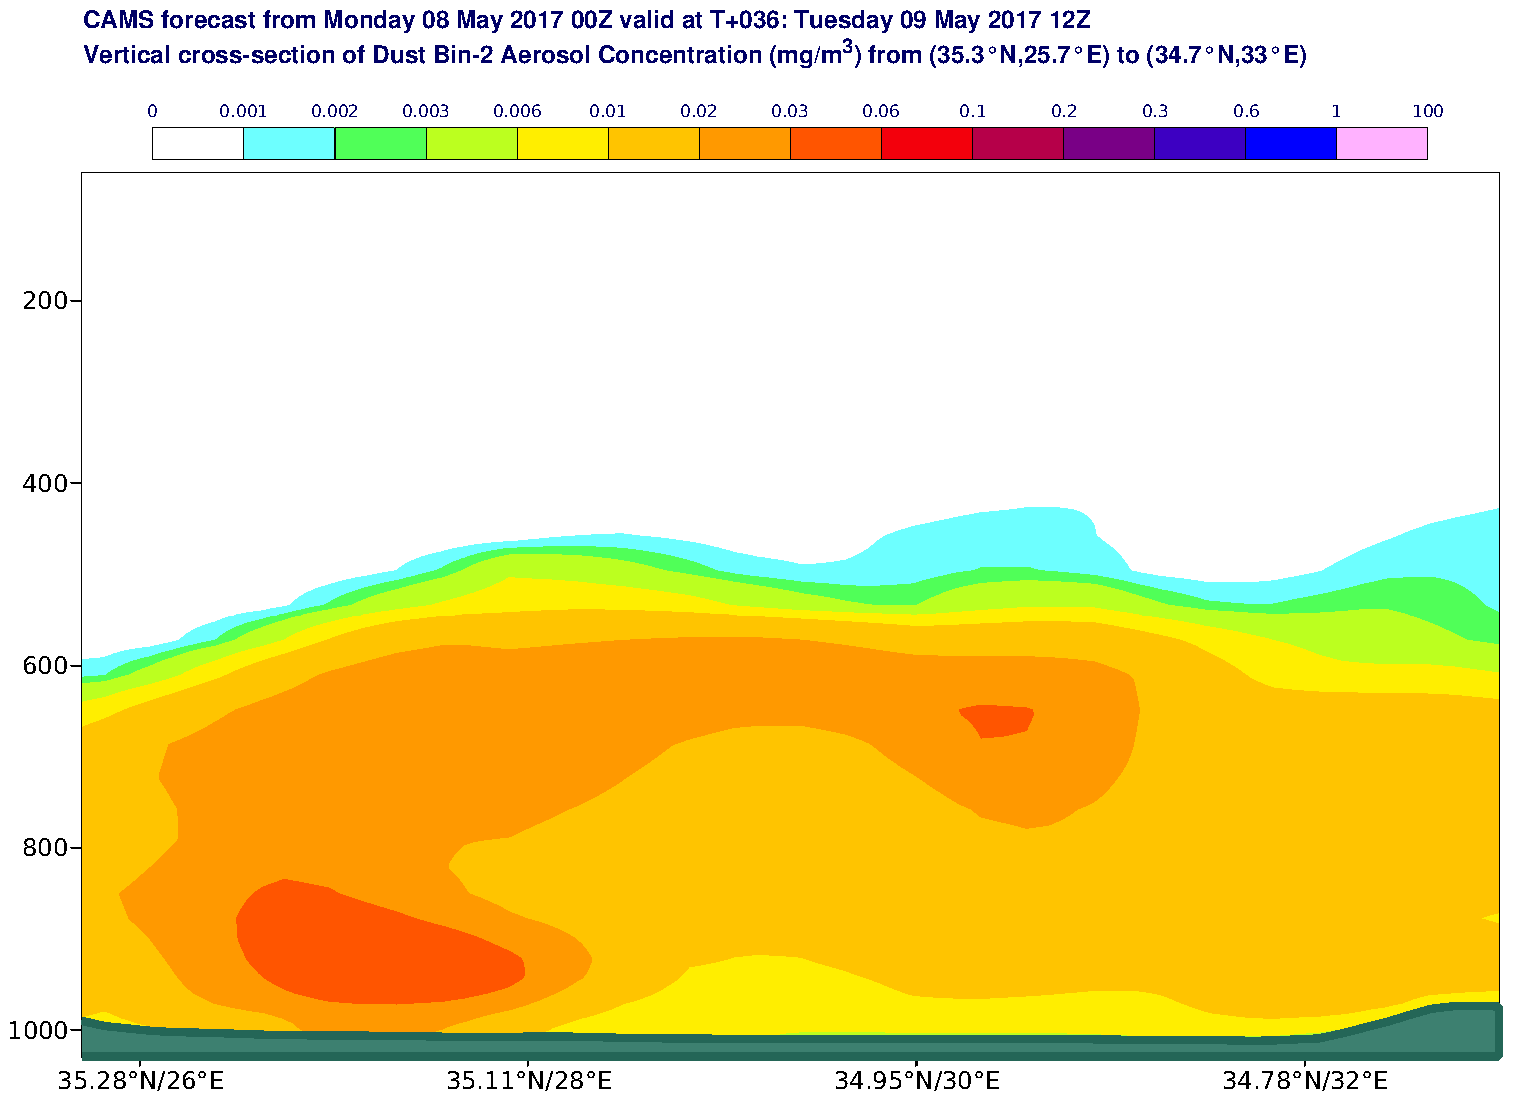 Vertical cross-section of Dust Bin-2 Aerosol Concentration (mg/m3) valid at T36 - 2017-05-09 12:00